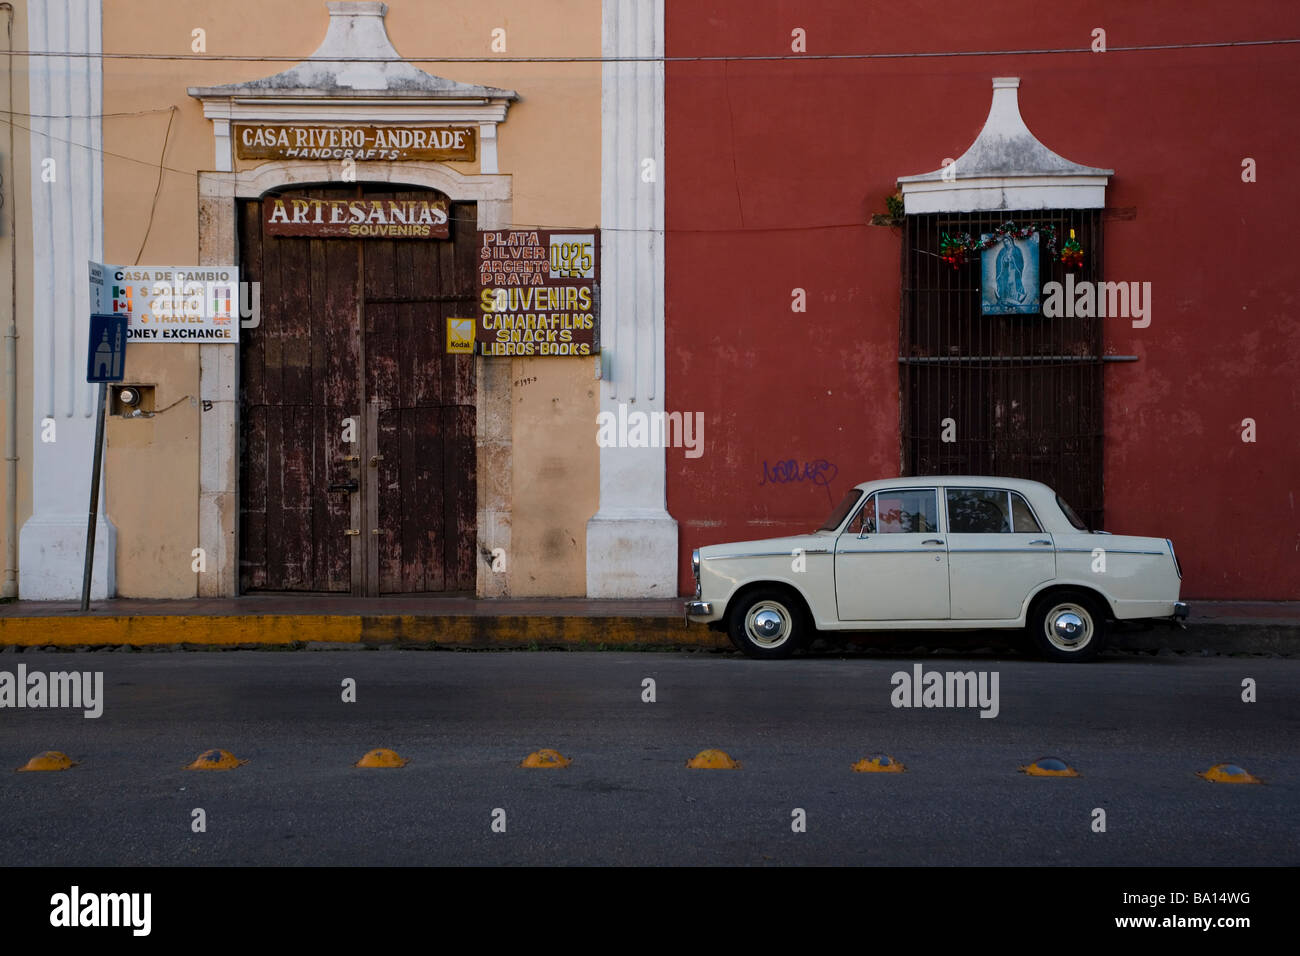 Antique Car Parked In Front Of A colorful And Stylish Old Building At Valladolid s Central Plaza Valladolid Yucatan Mexico Stock Photo